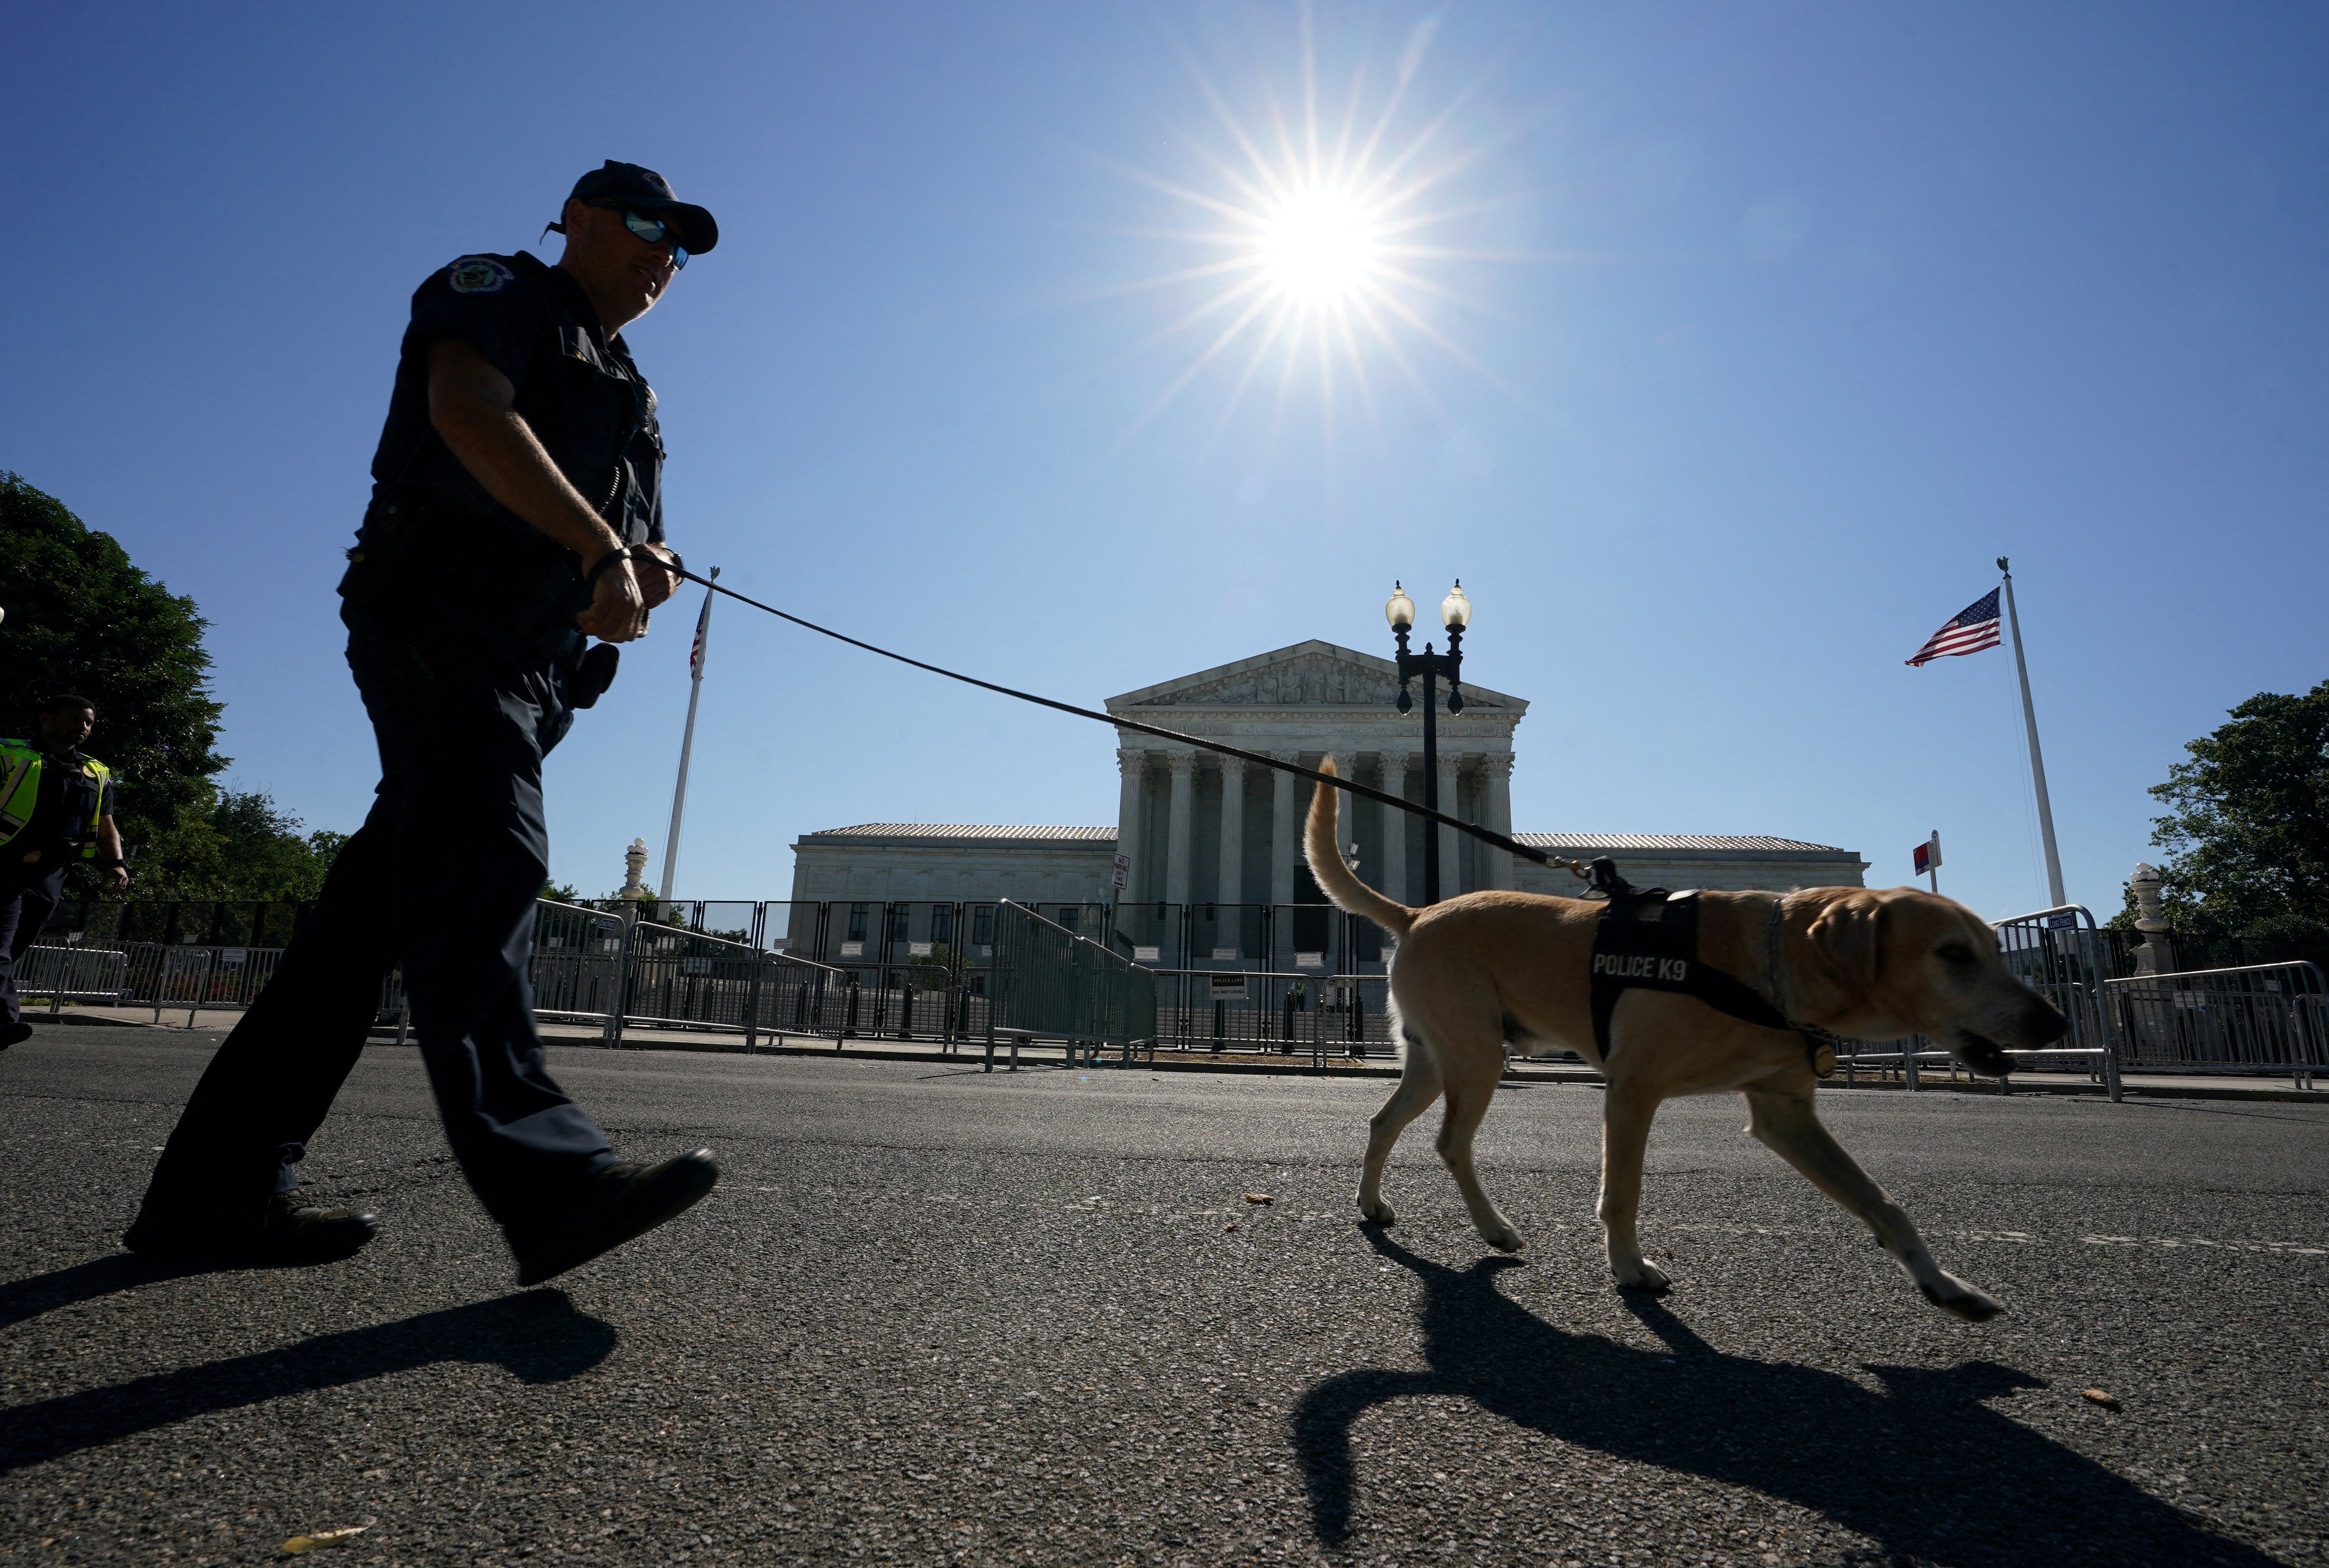 Police officer patrols in front of the Supreme Court in Washington